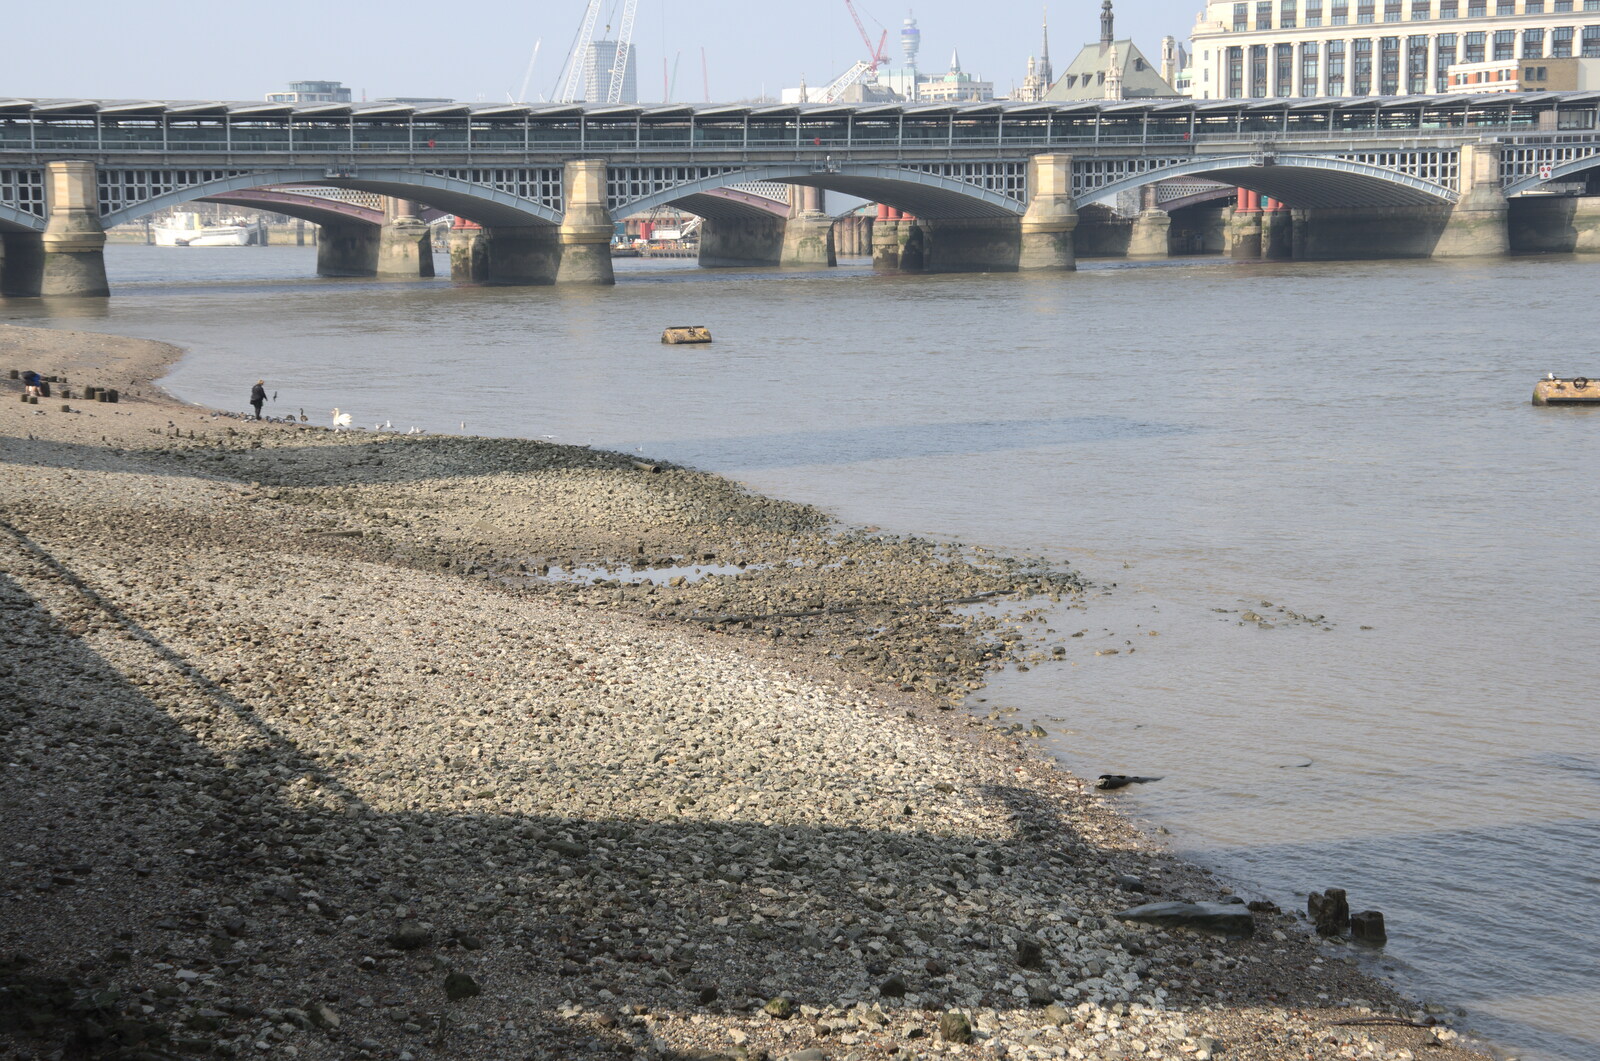 A Walk Around the South Bank, London - 25th March 2022: Blackfriars's Bridge, and low tide on the Thames